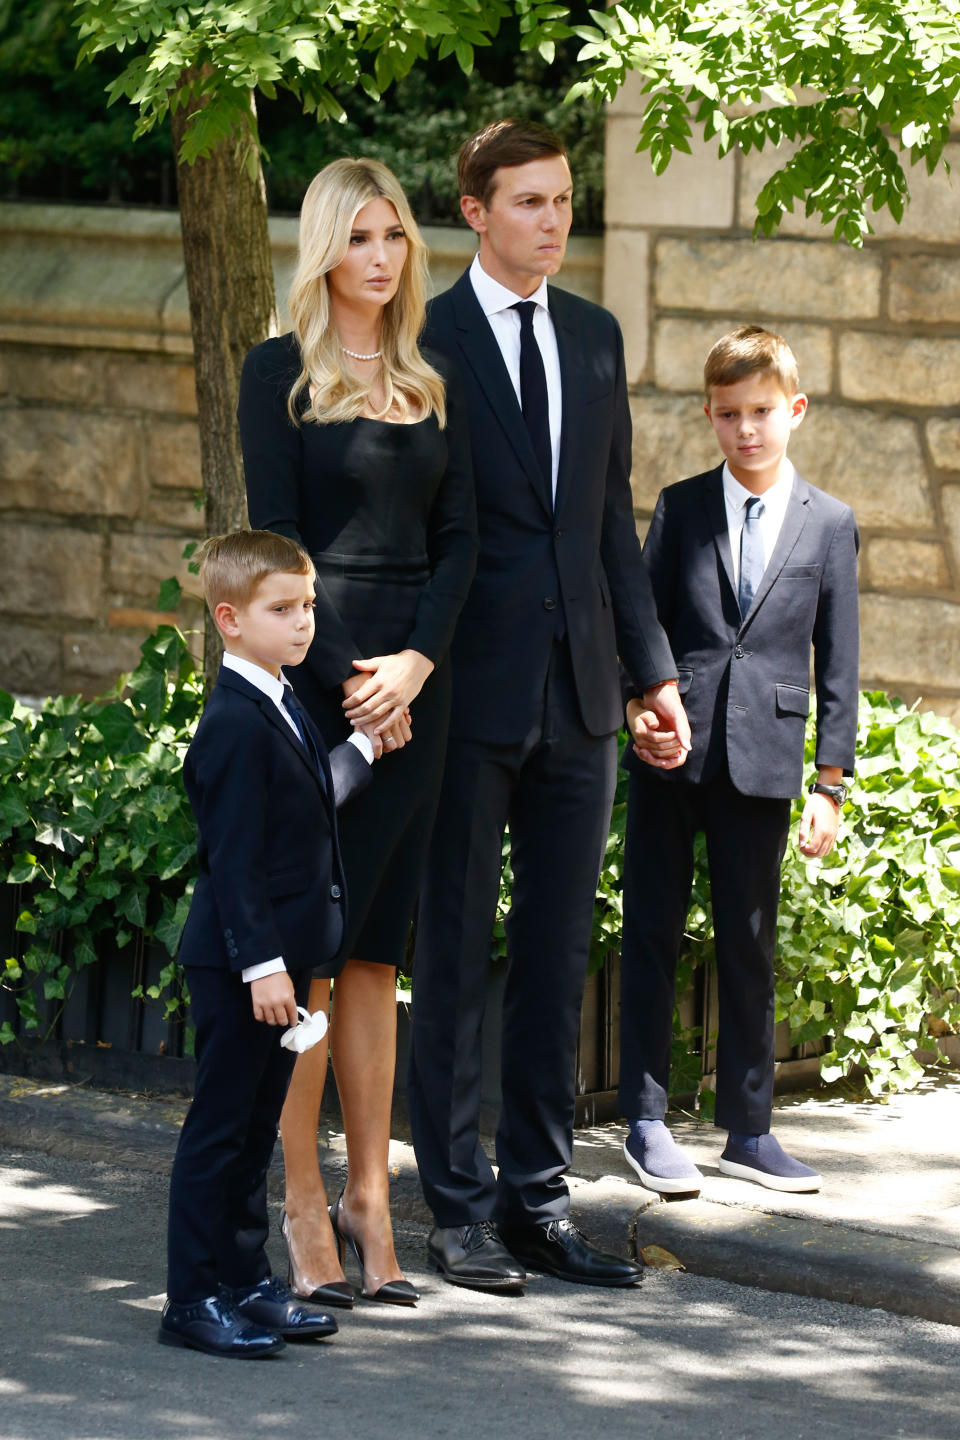 Ivanka Trump and Jared Kushner with their sons Theo and Joseph Kushner at the funeral of Ivana Trump. - Credit: John Lamparski/Getty Images